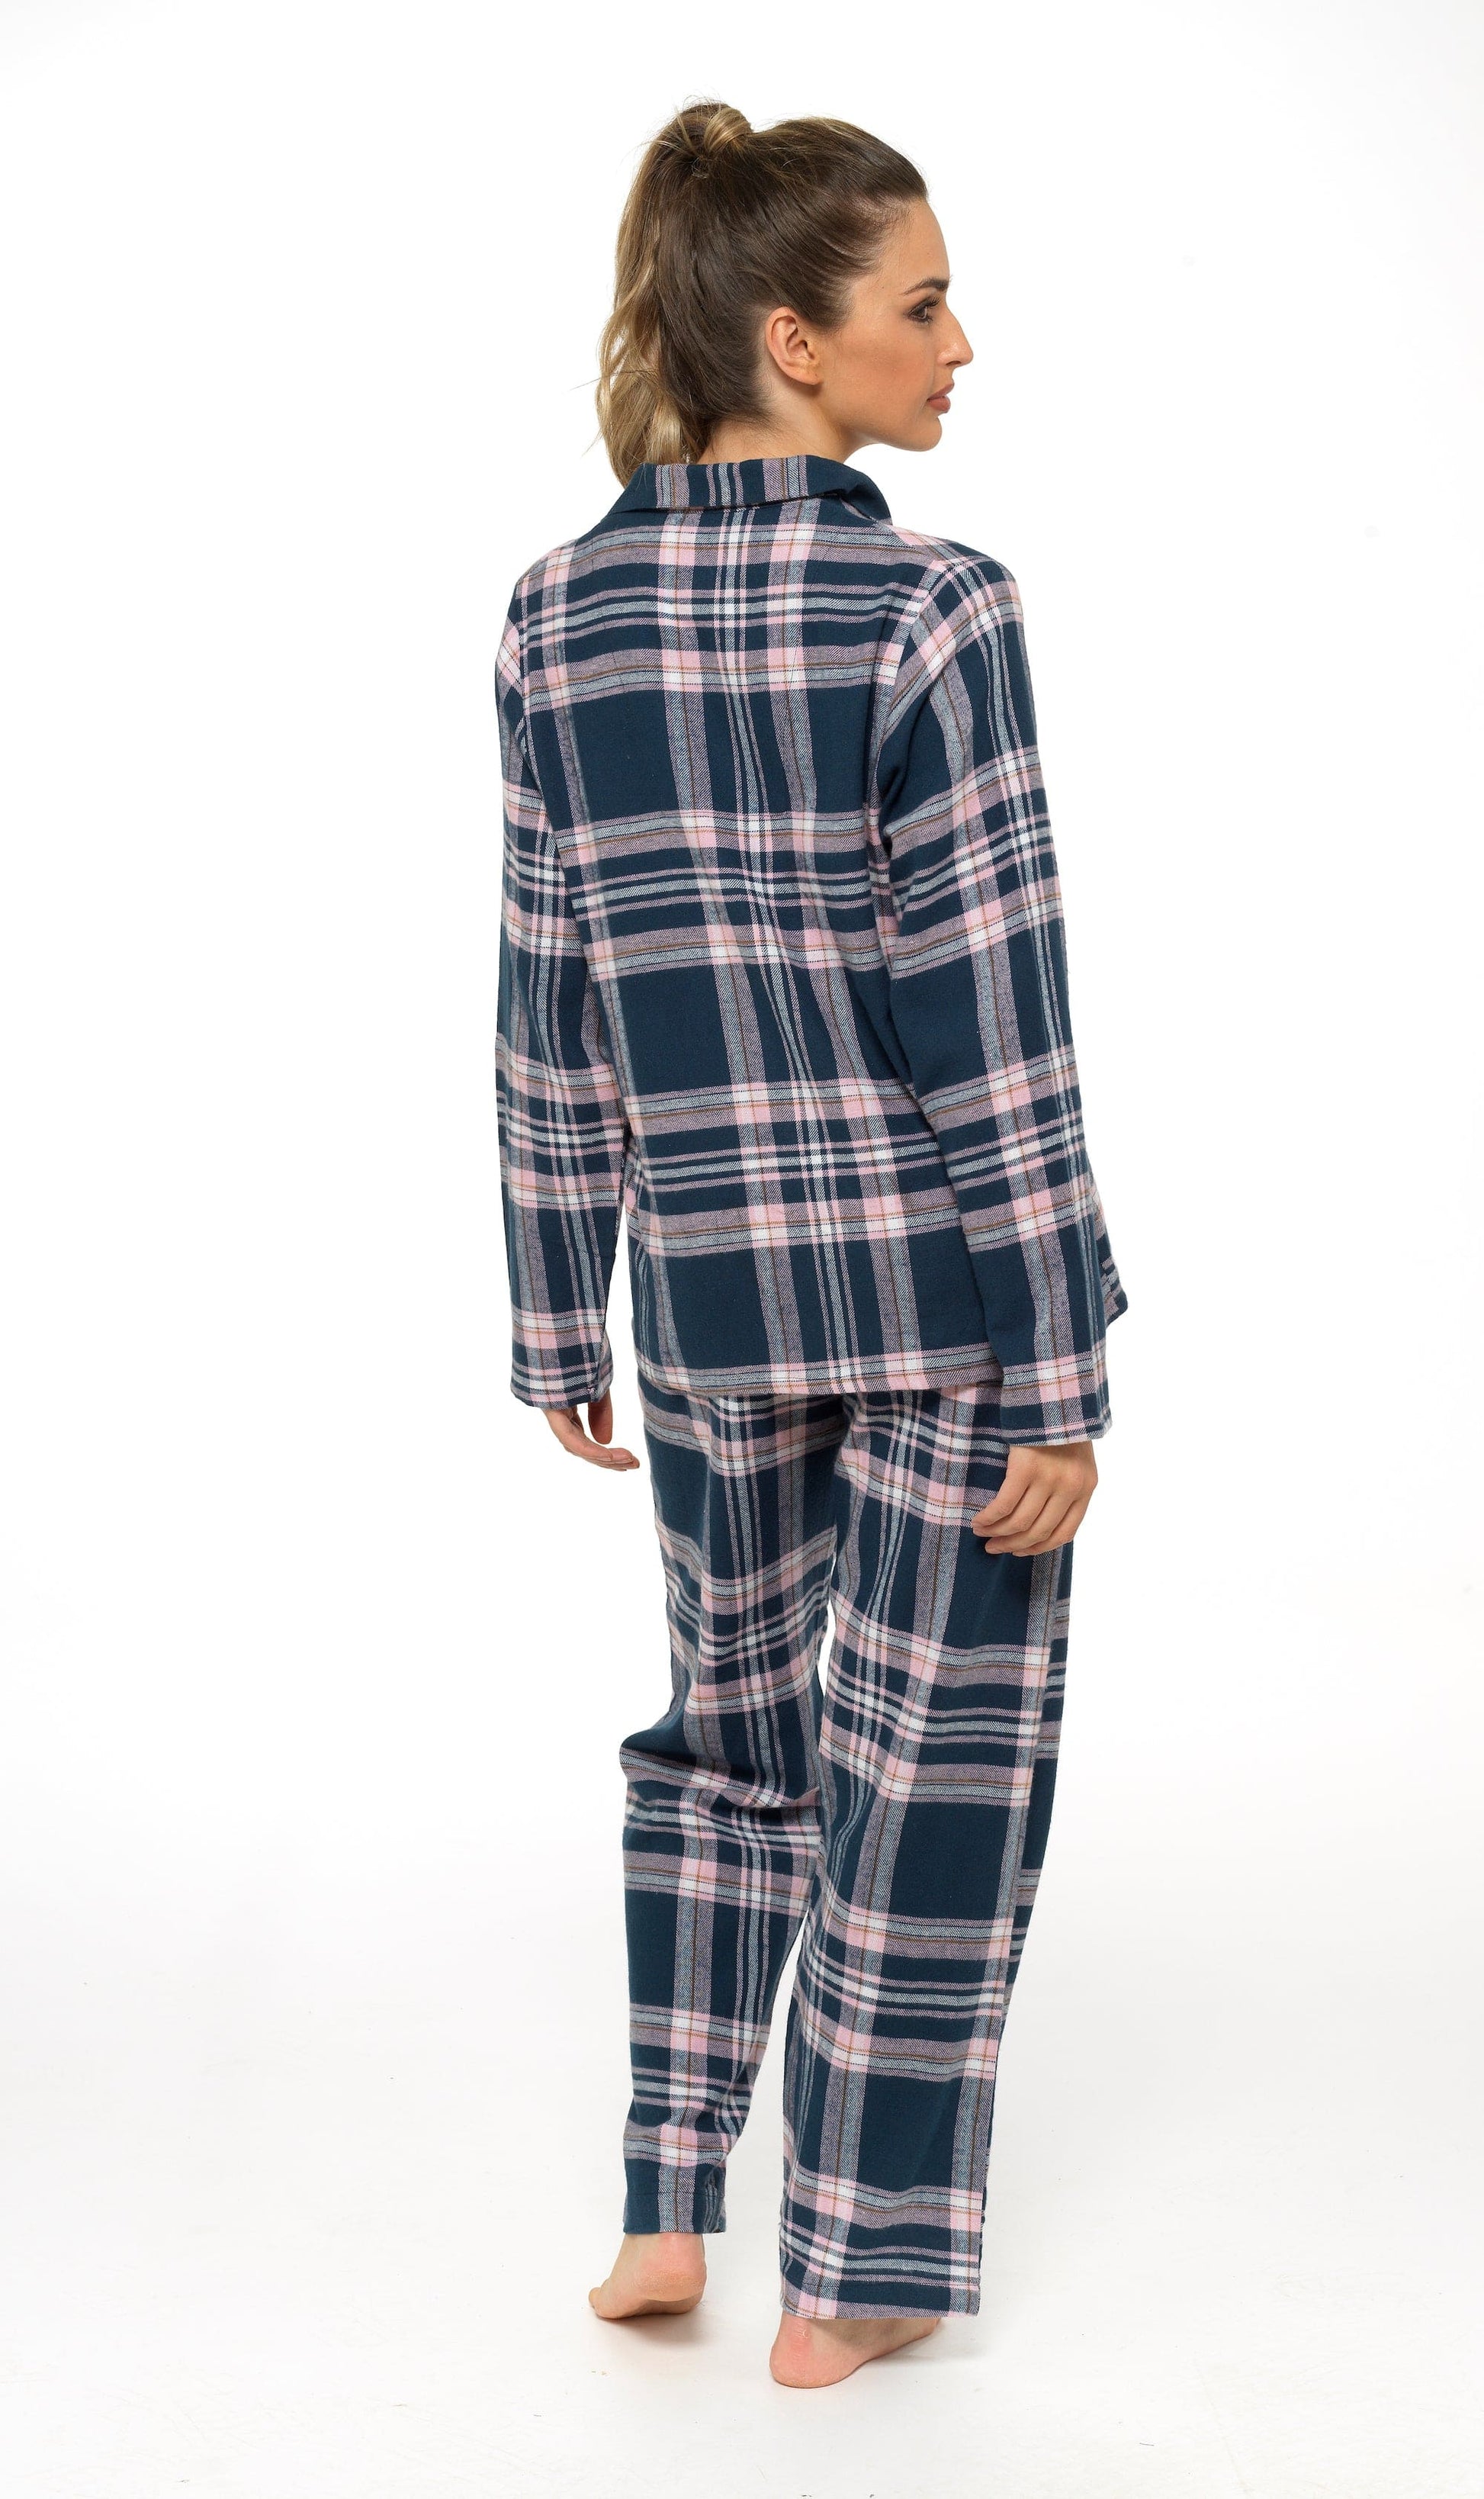 Introducing Our Brushed Organic Cotton Plaid PJ's 💕 Soft